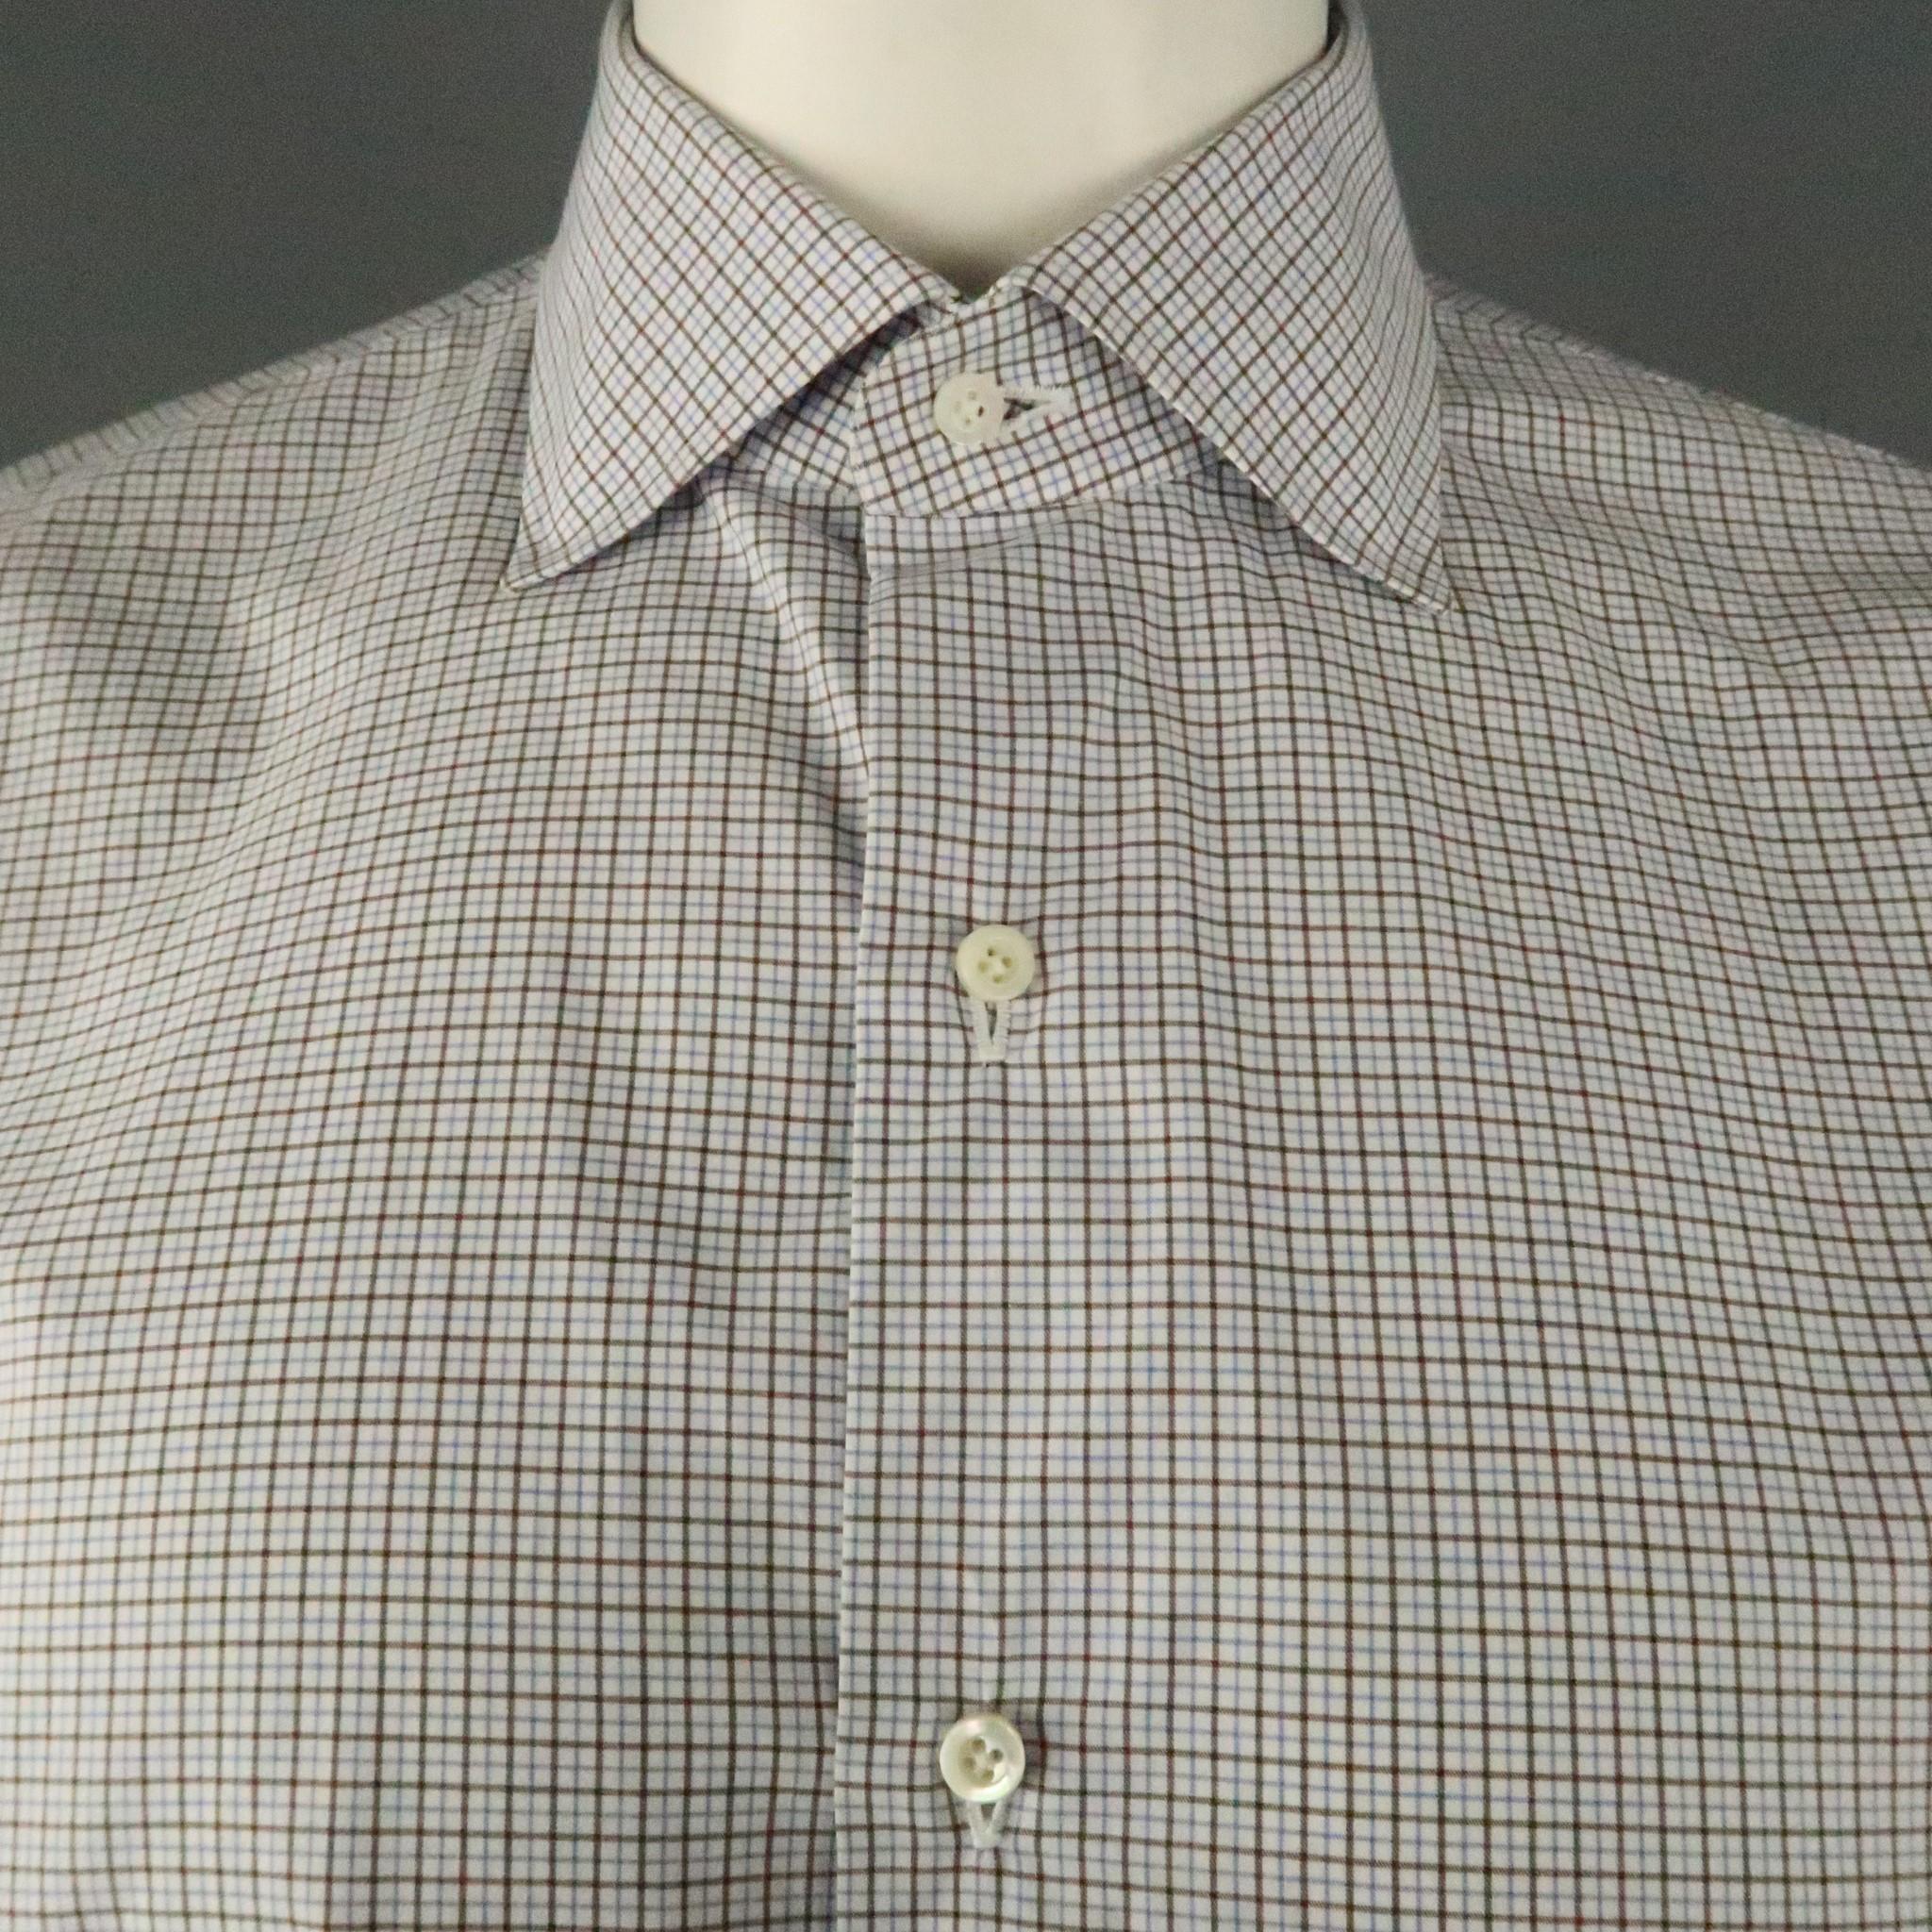 ISAIA long sleeve shirt comes in a white and blue plaid featuring a spread collar. Made in Italy.

Excellent Pre-Owned Condition.
Marked: 42

Measurements:

Shoulder: 20 in.
Chest: 46 in.
Sleeve: 27.5 in.
Length: 24.5 in.